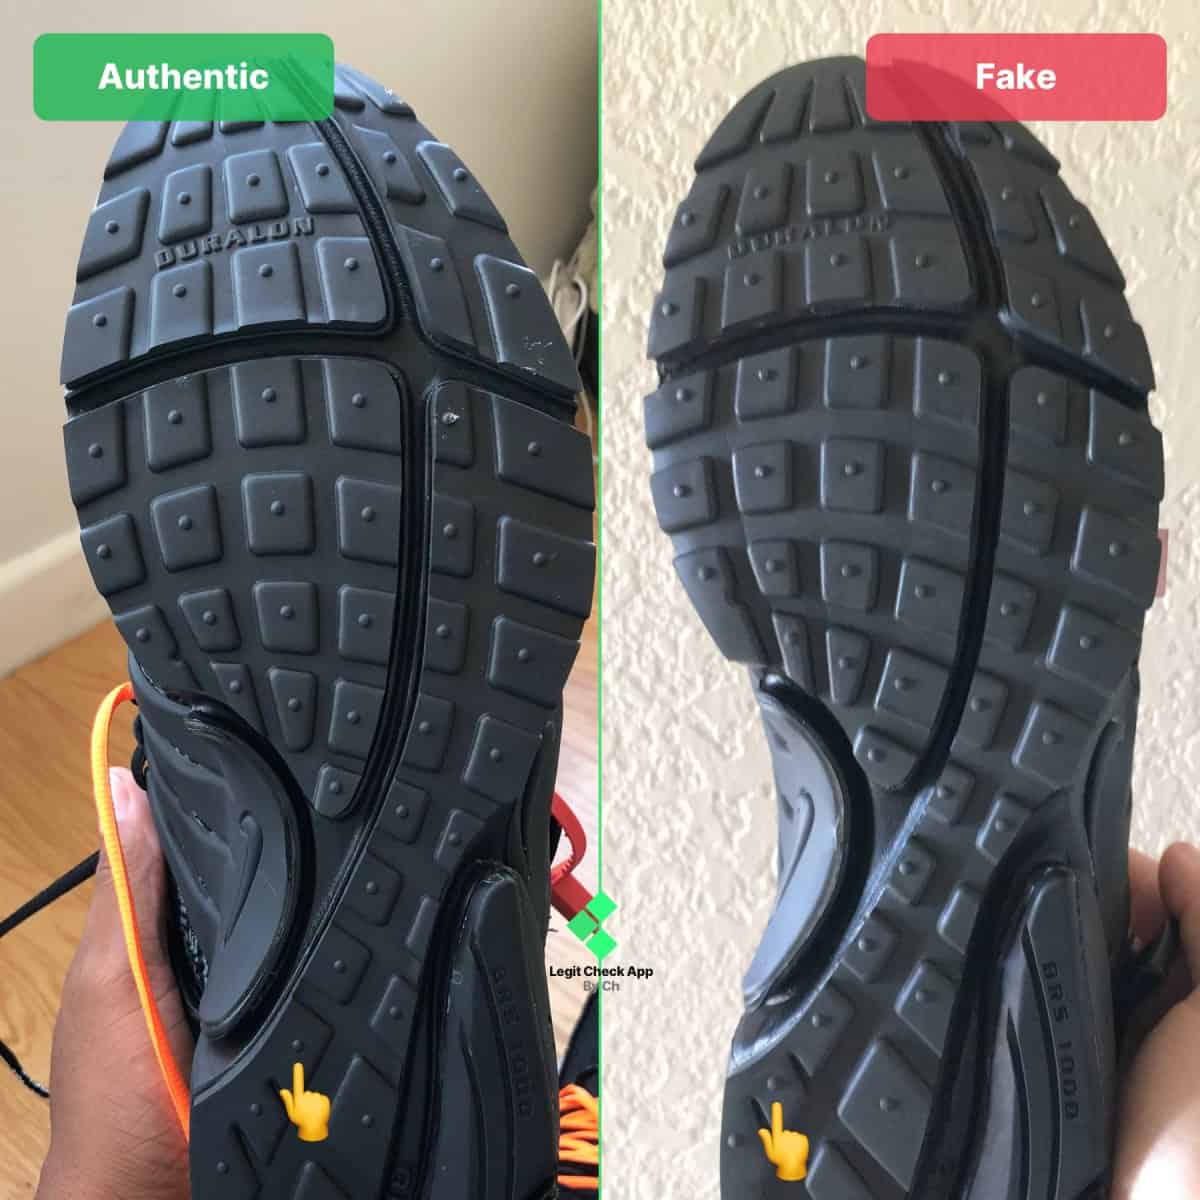 how to authenticate Off-White Air Presto Black